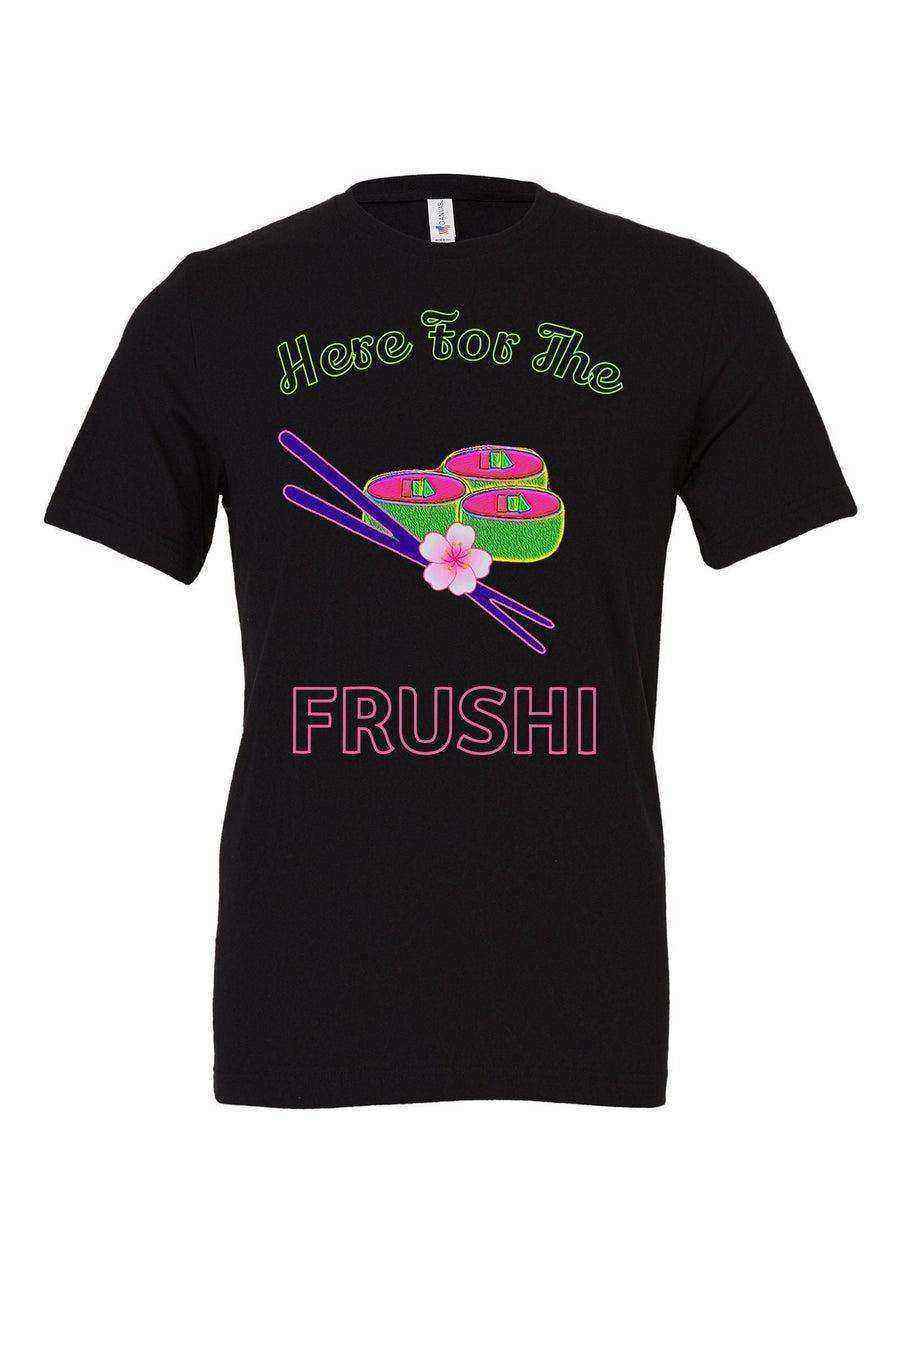 Here For The Frushi Shirt | Flower and Garden - Dylan's Tees